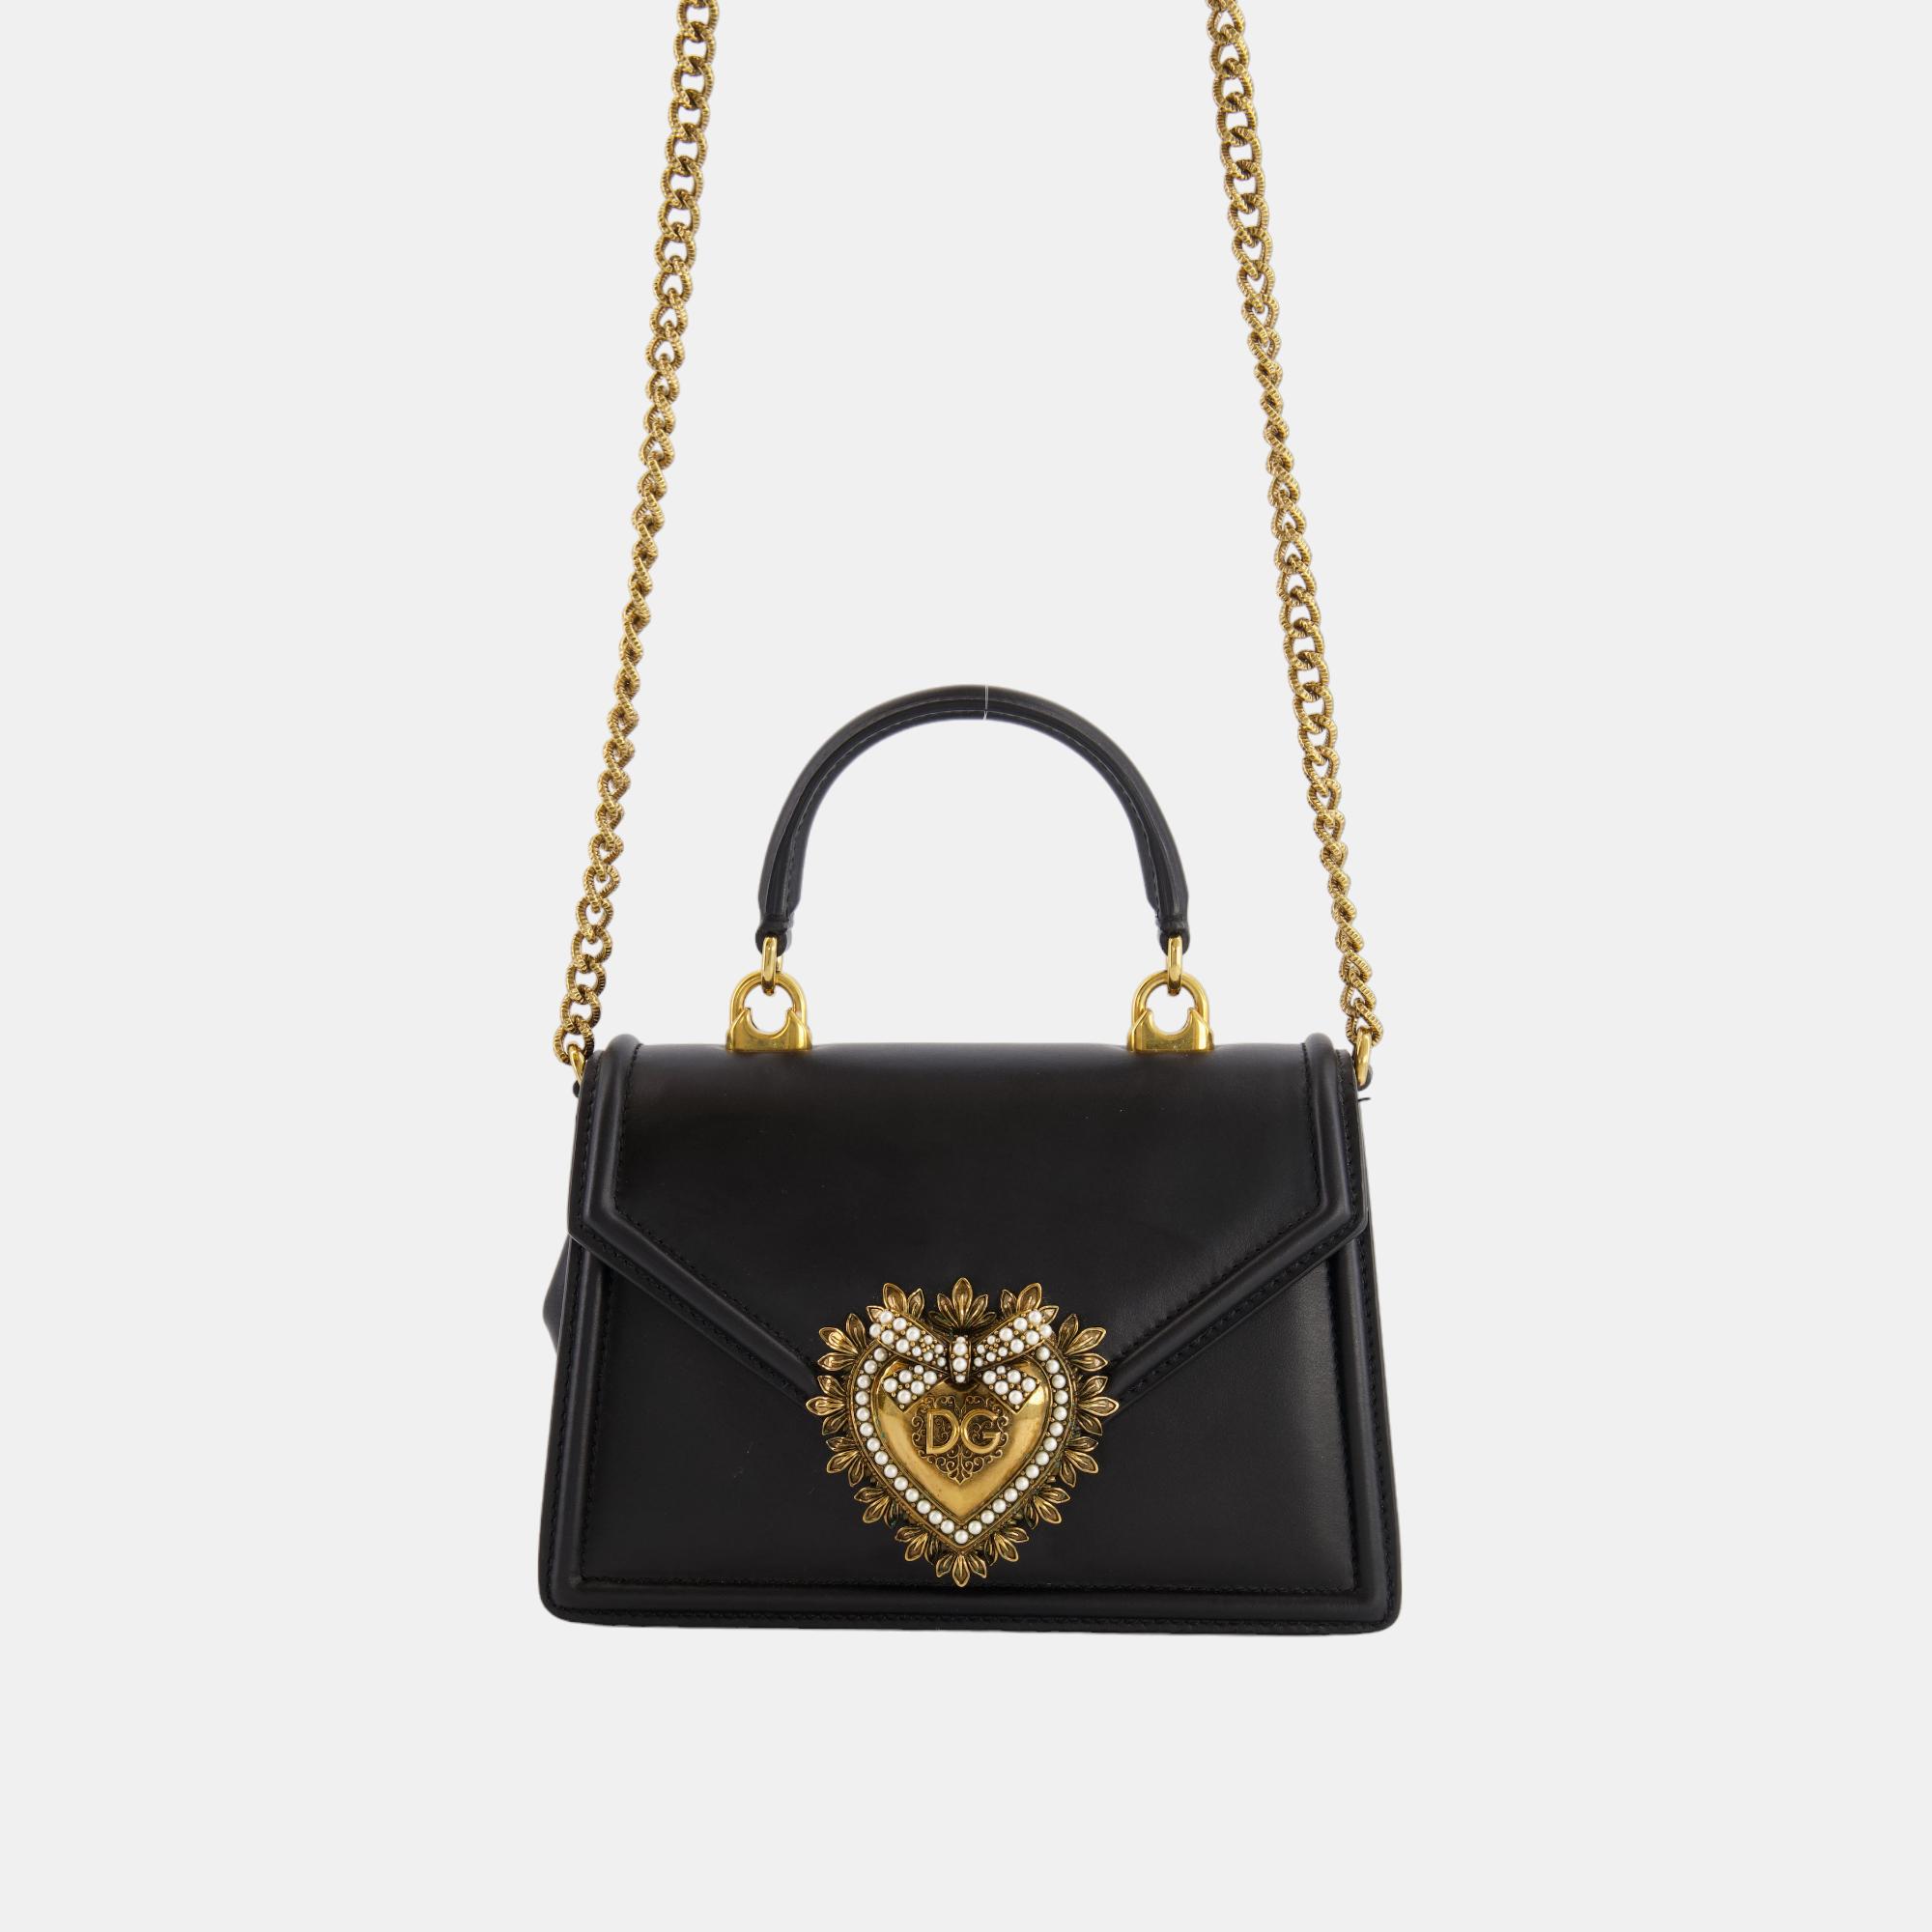 Dolce & Gabbana Black Leather Small Devotion Top-Handle Bag With Gold Hardware